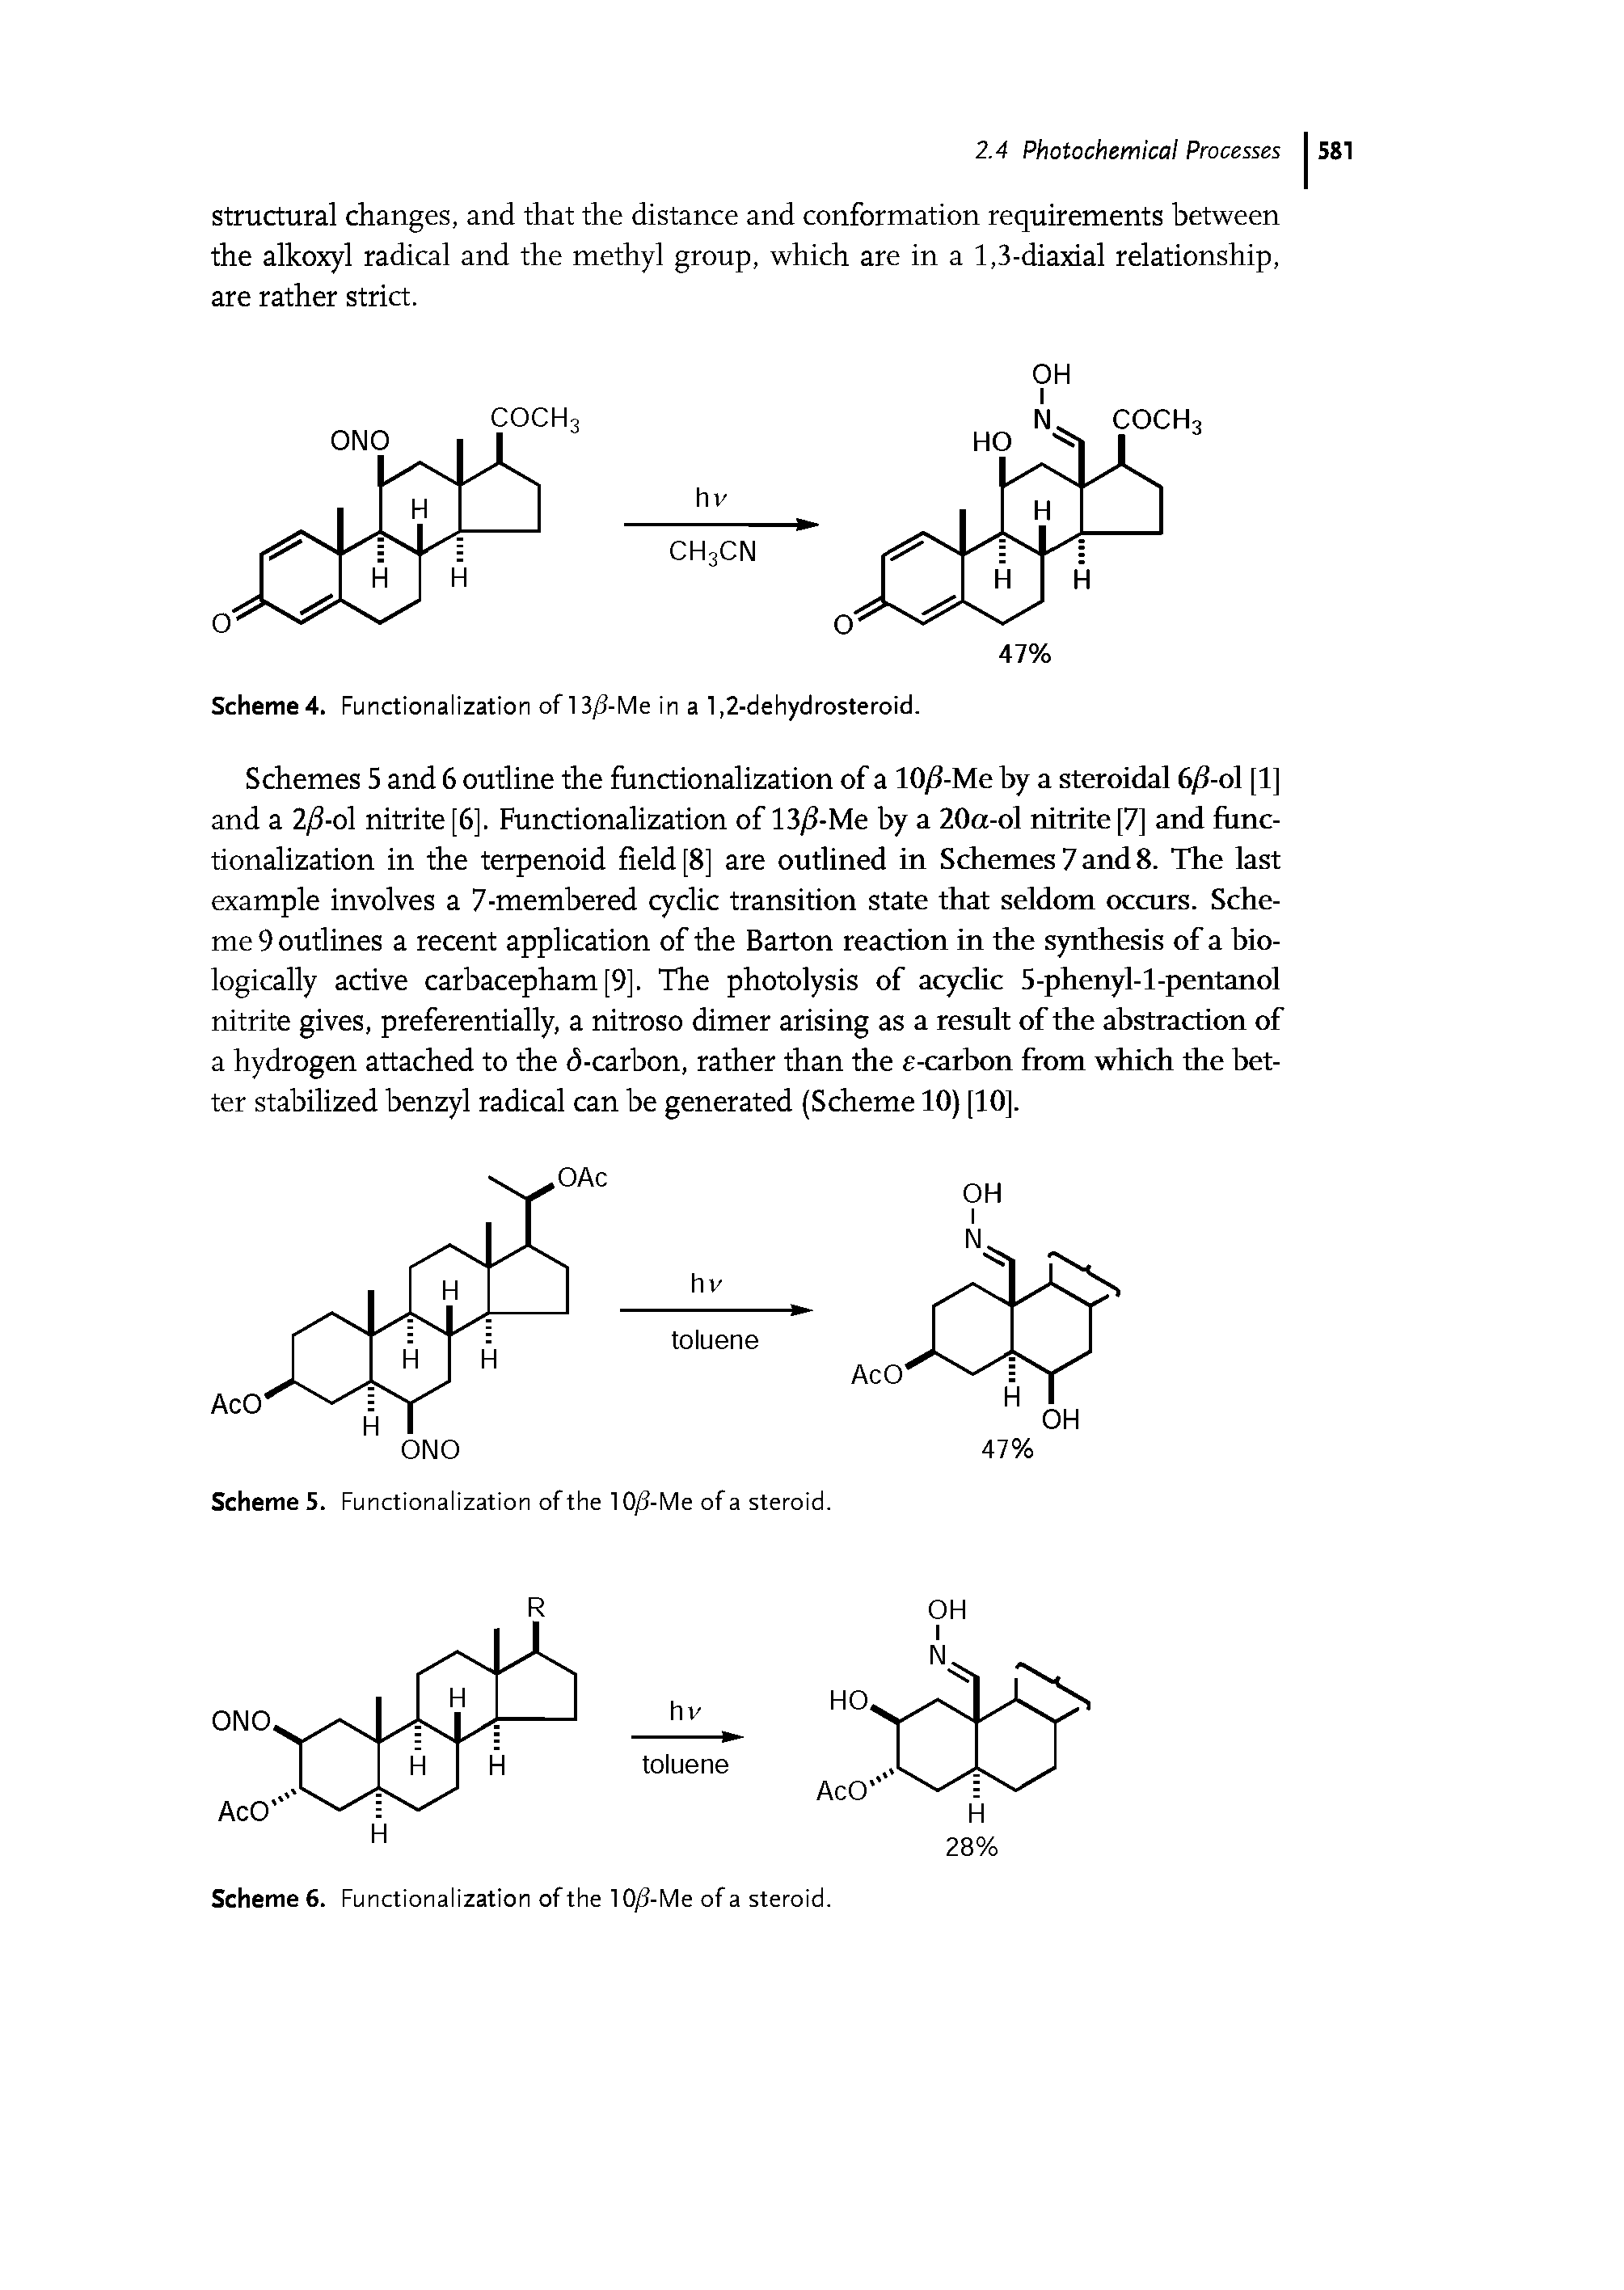 Schemes 5 and 6 outline the functionalization of a 10/1-Me by a steroidal 6/f-ol [1] and a 2/3-61 nitrite [6], Functionalization of 13/i-Me by a 20a-ol nitrite [7] and functionalization in the terpenoid field [8] are outlined in Schemes 7 and 8. The last example involves a 7-membered cyclic transition state that seldom occurs. Scheme 9 outlines a recent application of the Barton reaction in the synthesis of a biologically active carbacepham [9]. The photolysis of acyclic 5-phenyl-1-pentanol nitrite gives, preferentially, a nitroso dimer arising as a result of the abstraction of a hydrogen attached to the d-carbon, rather than the e-carbon from which the better stabilized benzyl radical can be generated (Scheme 10) [10].